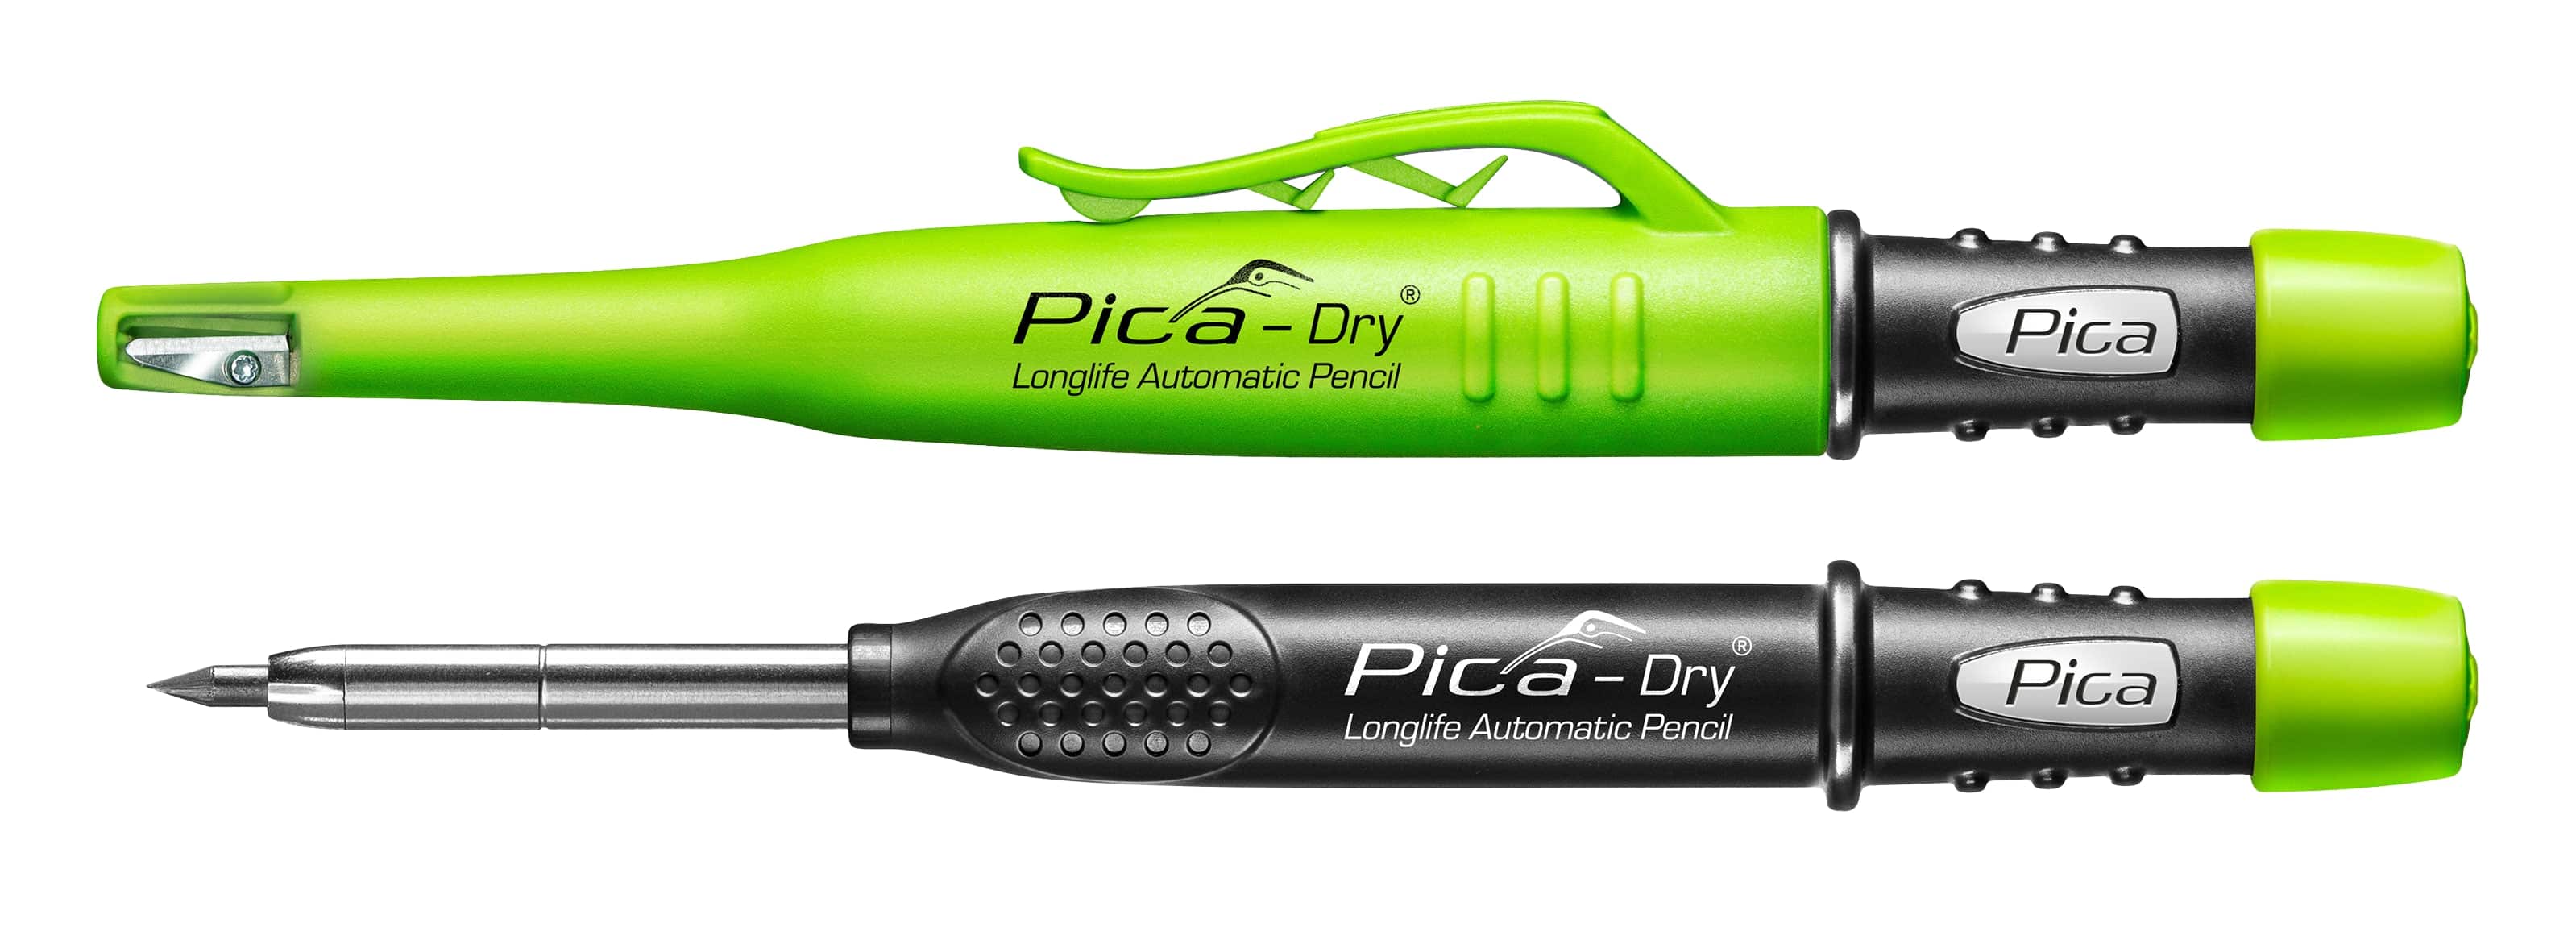 PICA Dry Tieflochmarker Longlife Automatic Pencil